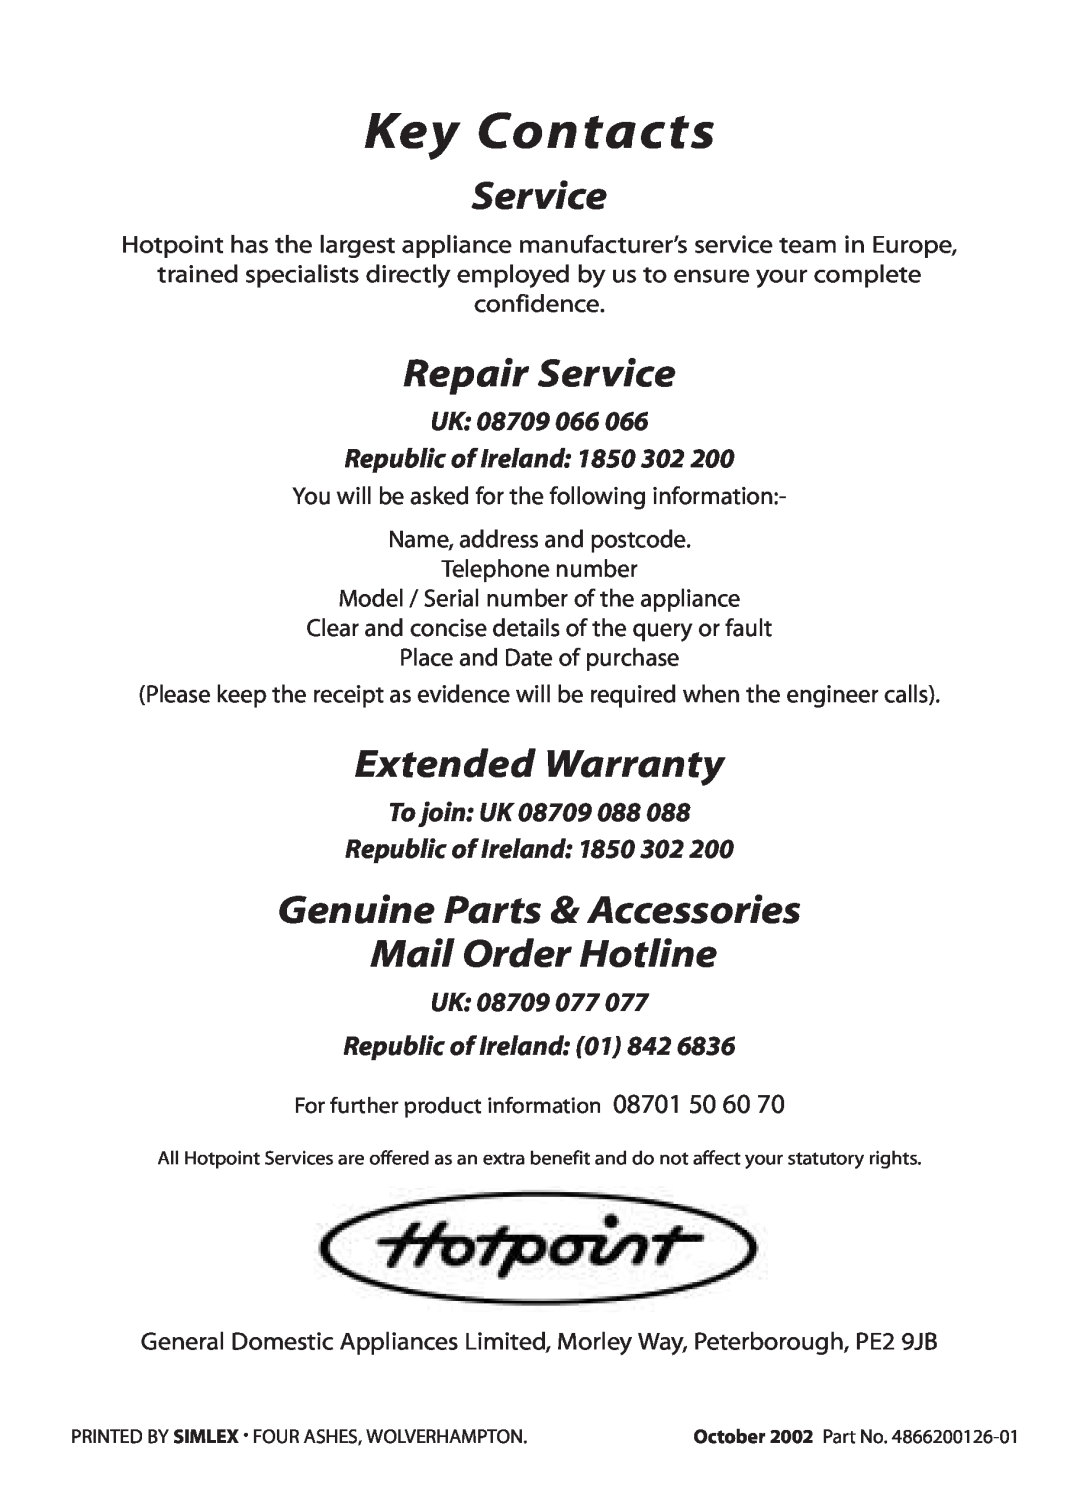 Hotpoint BU62 BU65 Key Contacts, Repair Service, Extended Warranty, Genuine Parts & Accessories Mail Order Hotline 